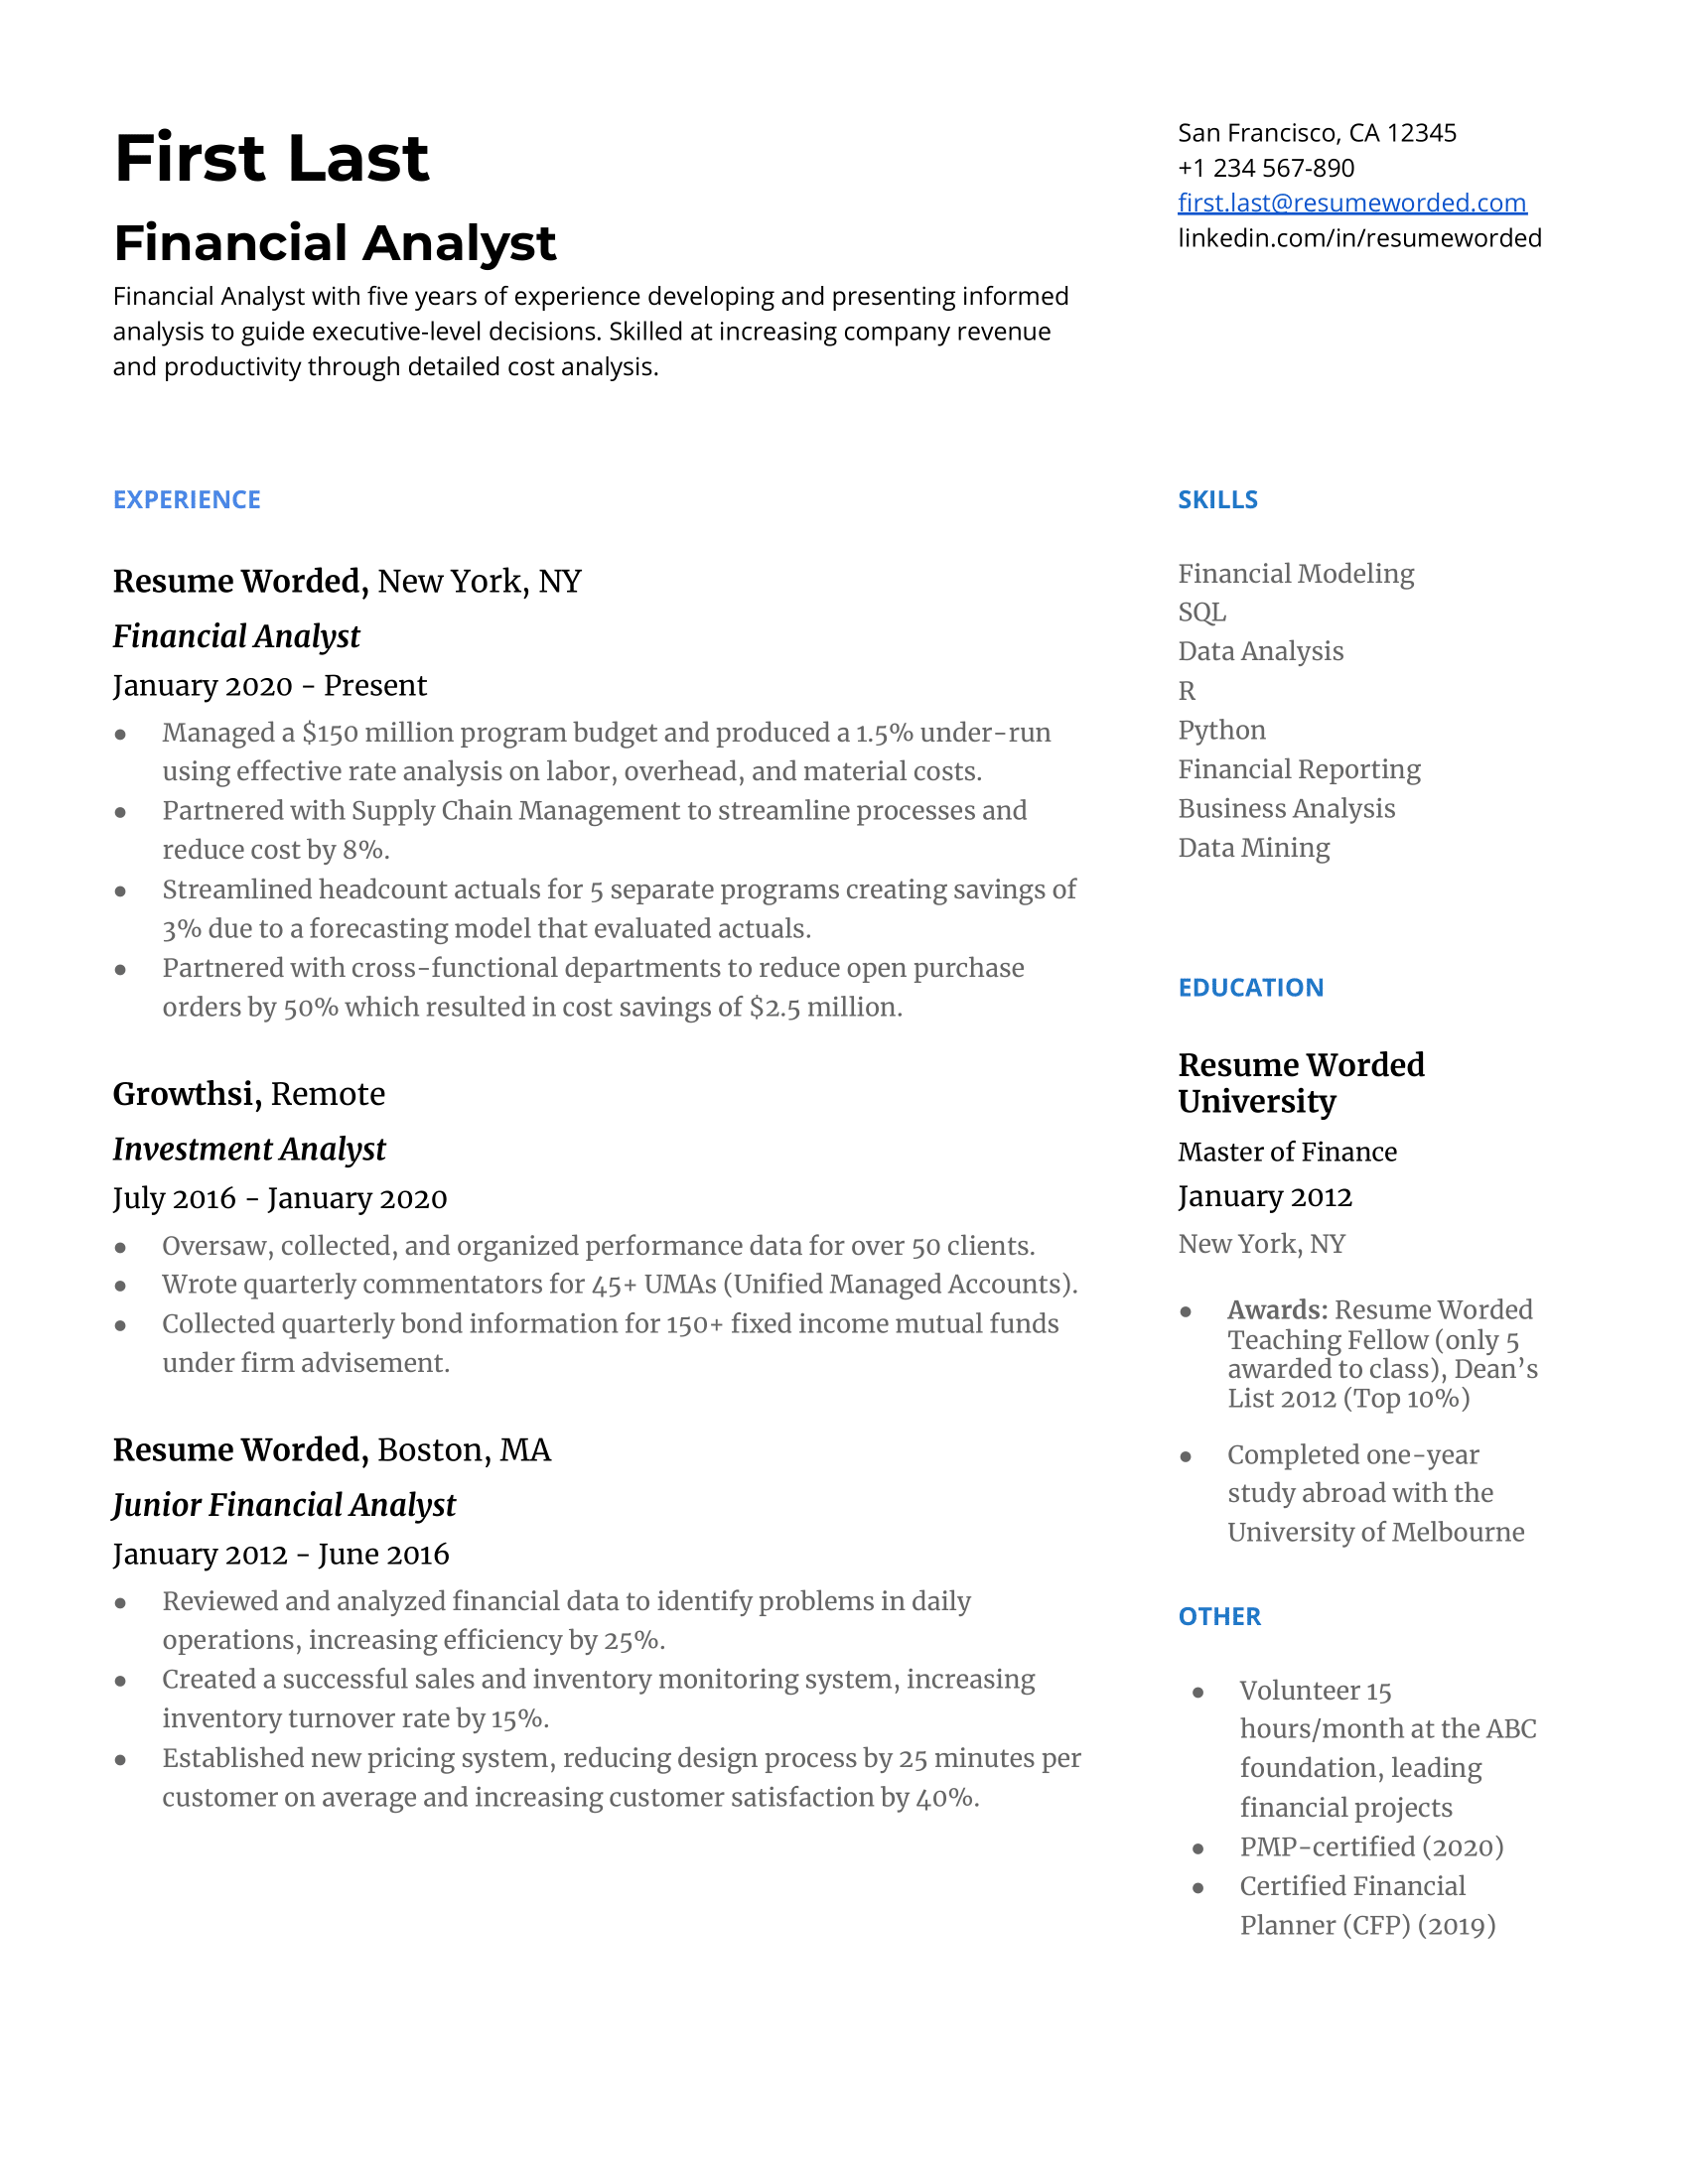 Financial analyst resume with specific achievements and hard skills section